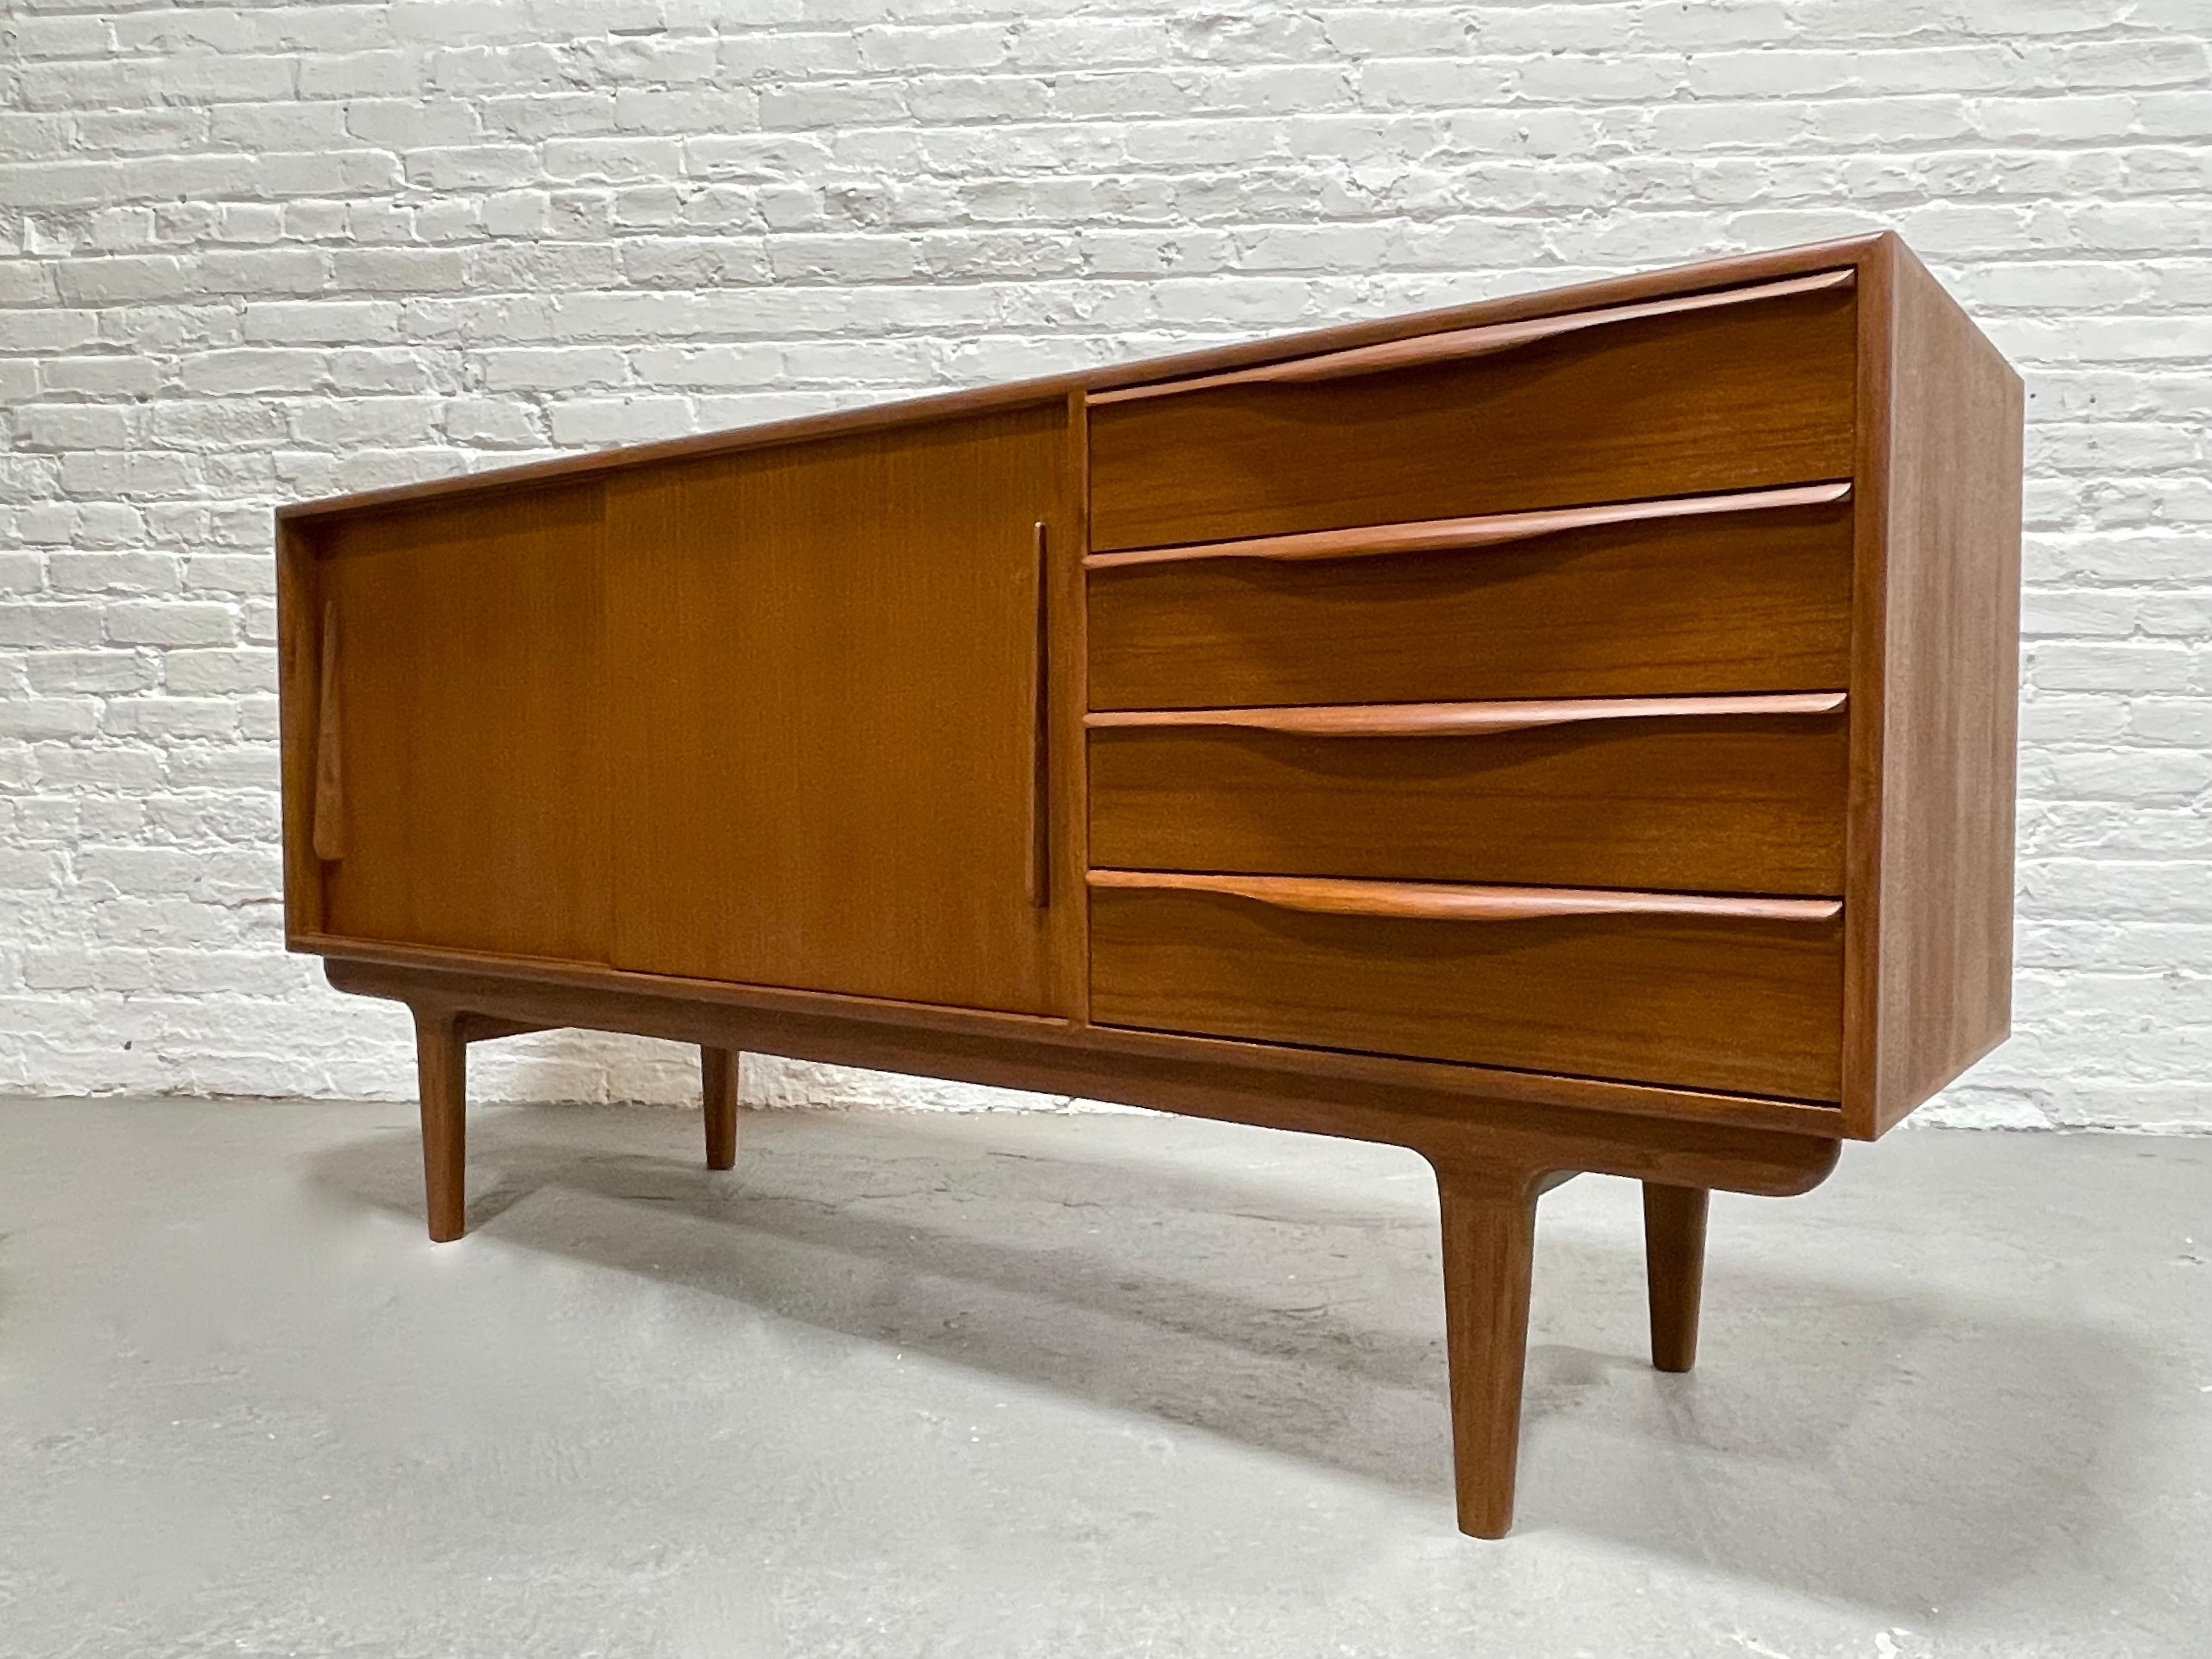 Sculptural Mid-Century Modern Styled Credenza / Media Stand / Sideboard For Sale 1